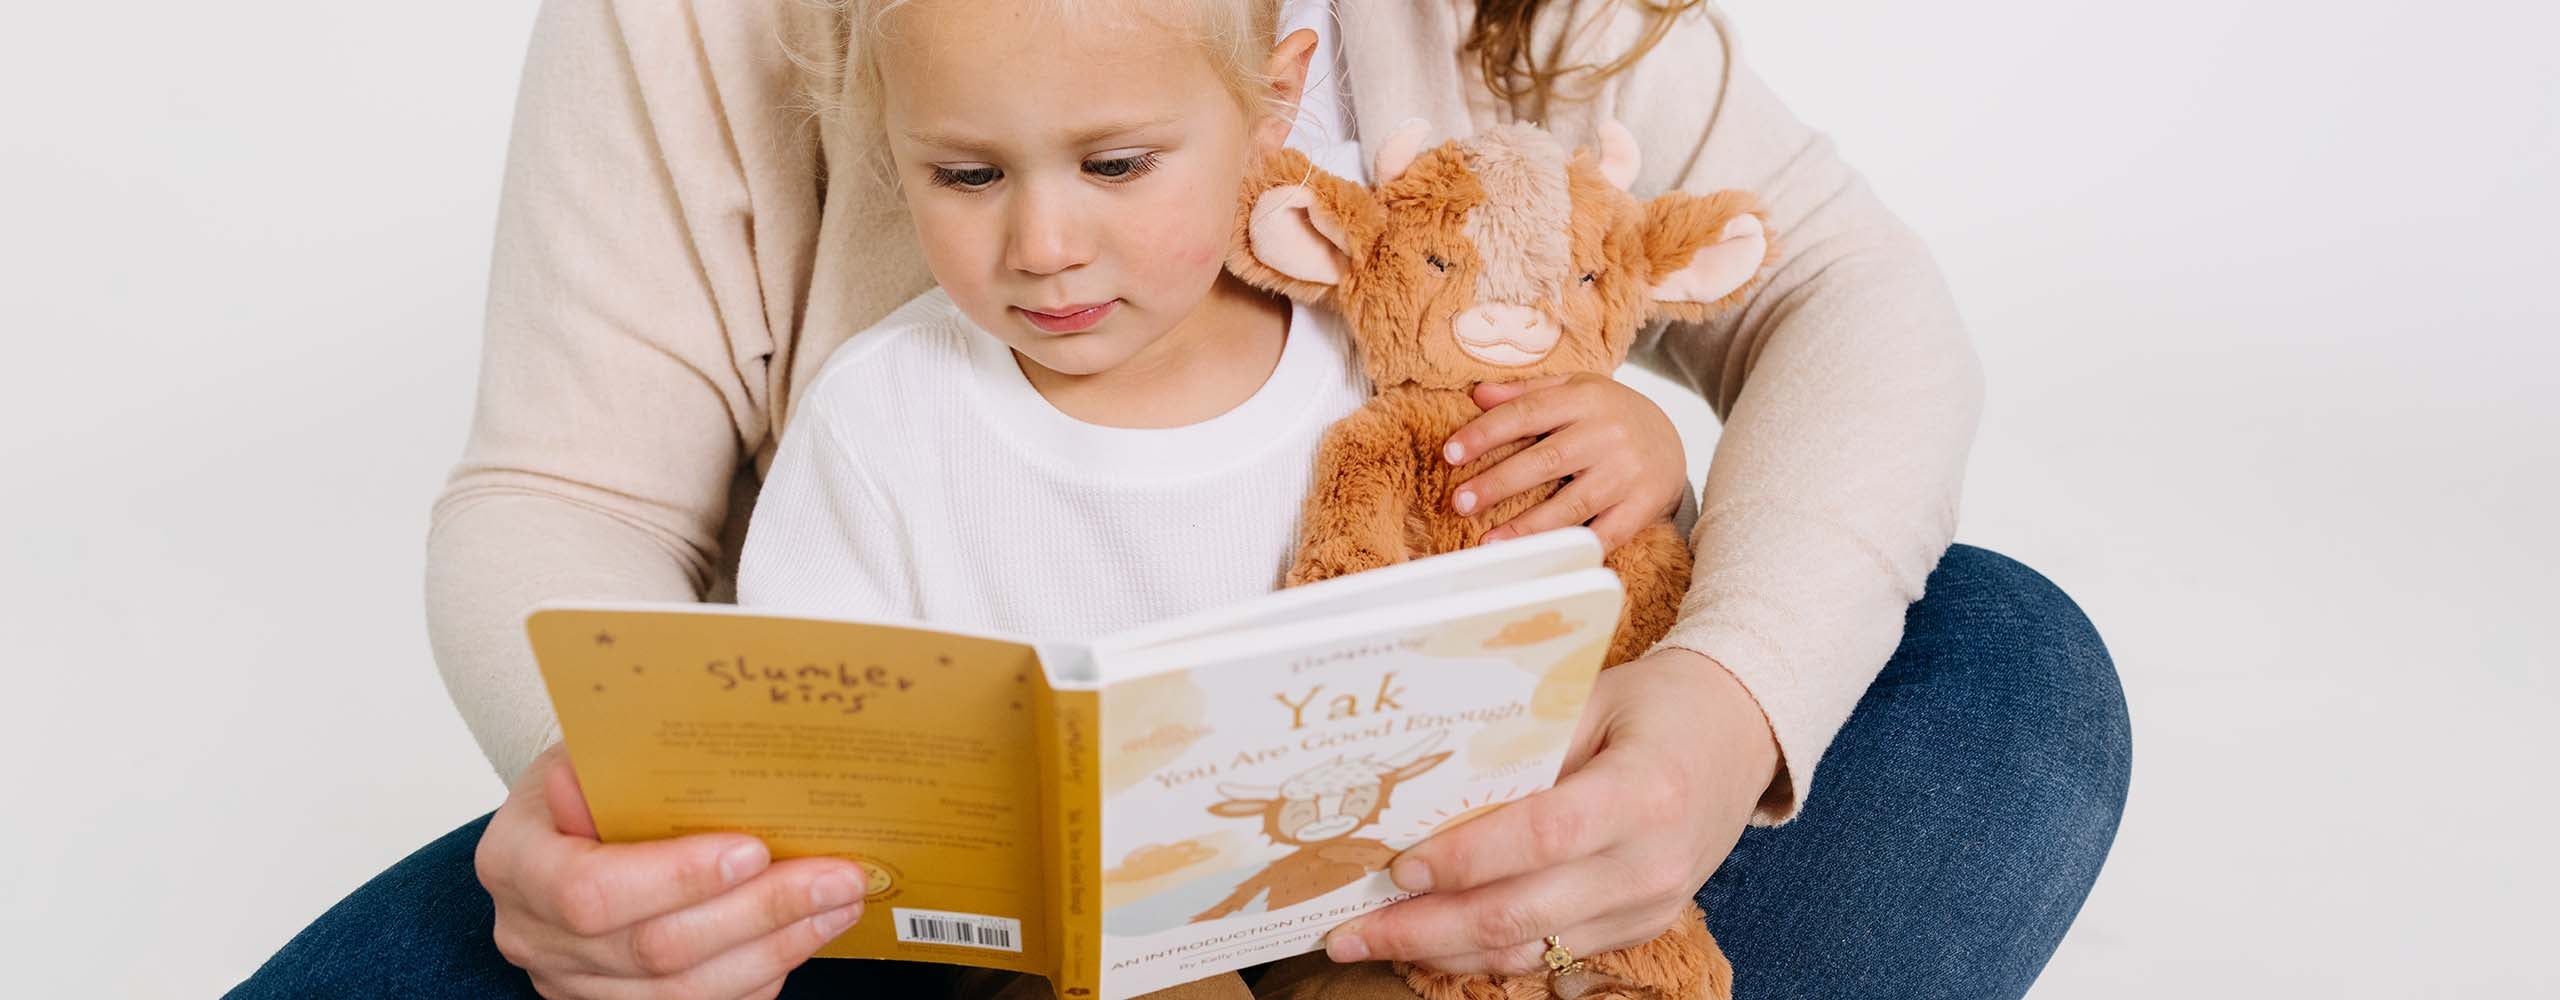 A child holding a stuffed animal attentively reads a book with an adult's assistance.